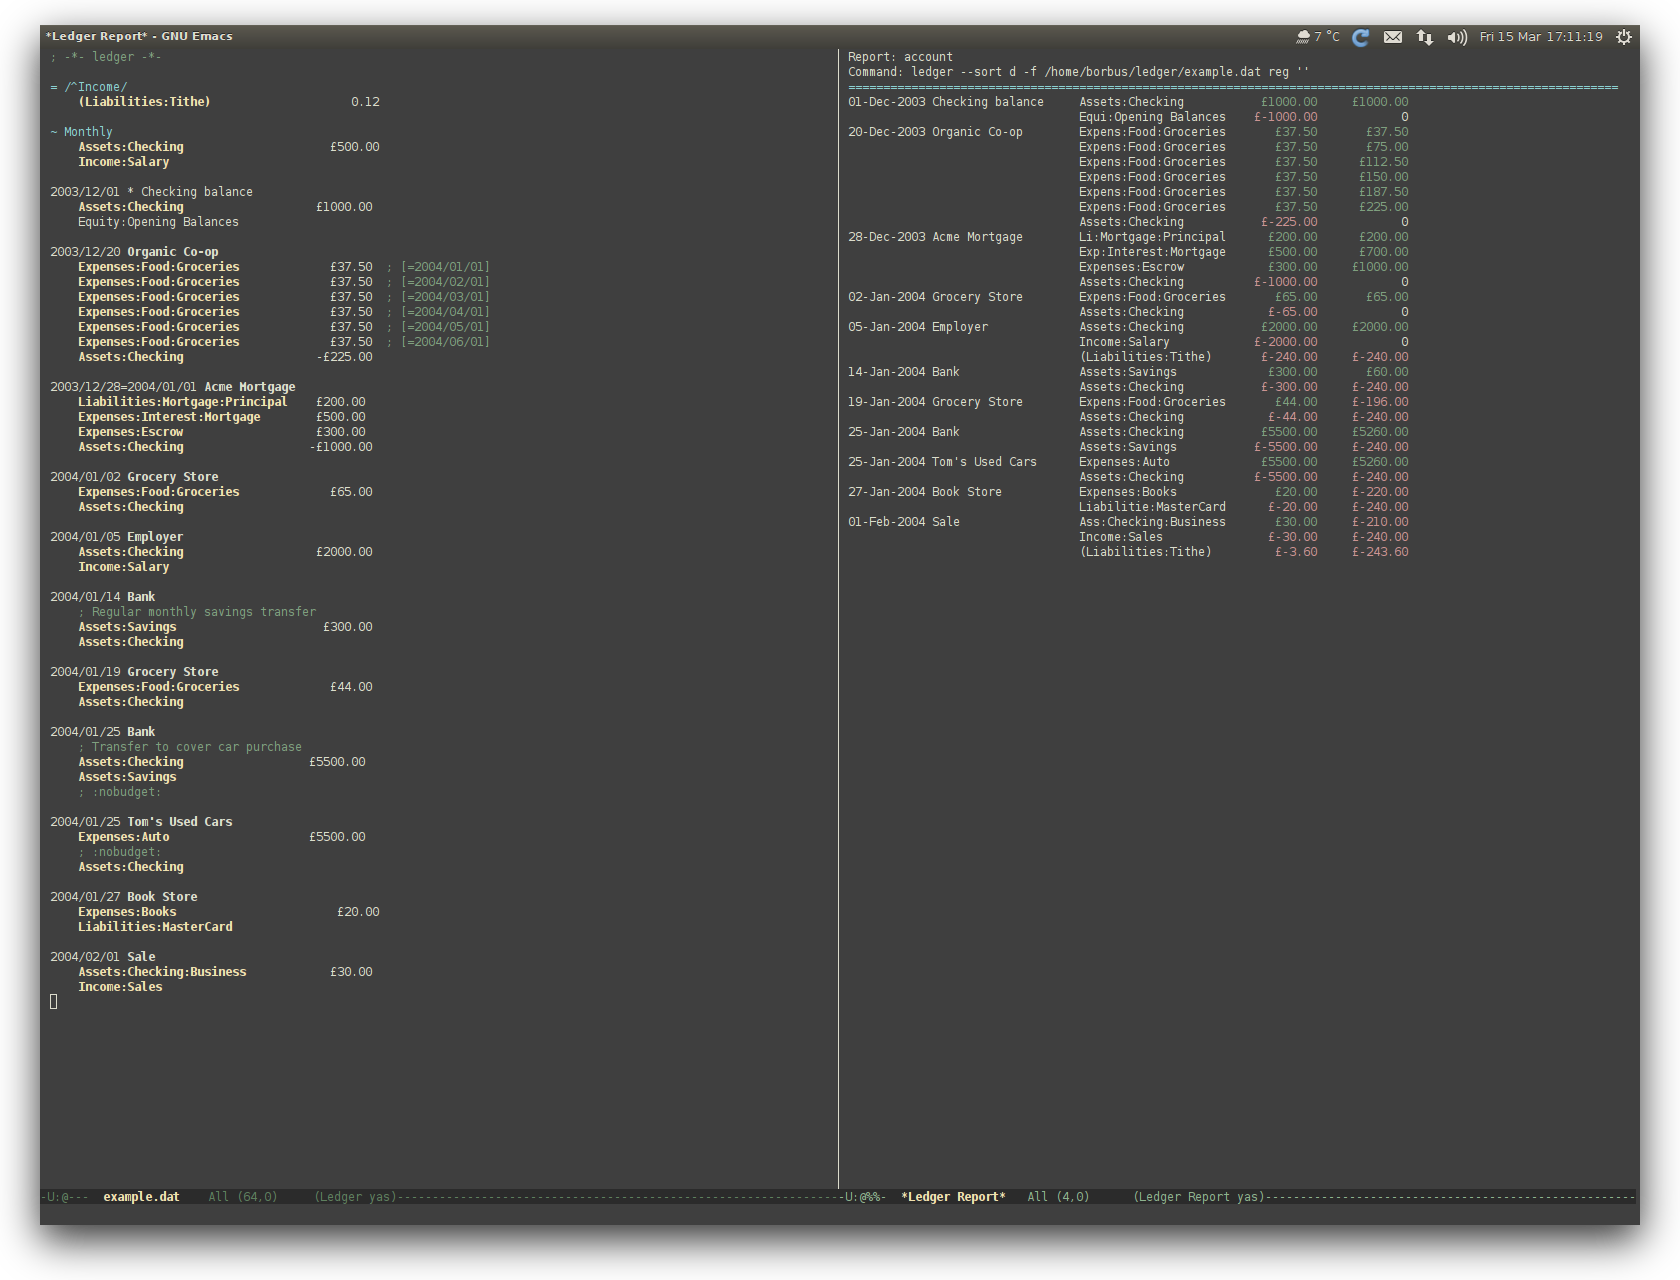 /TakeV/spacemacs/media/commit/362b6998cfa2a68825faa53c0cd1df3347c89deb/layers/finance/img/ledger.png